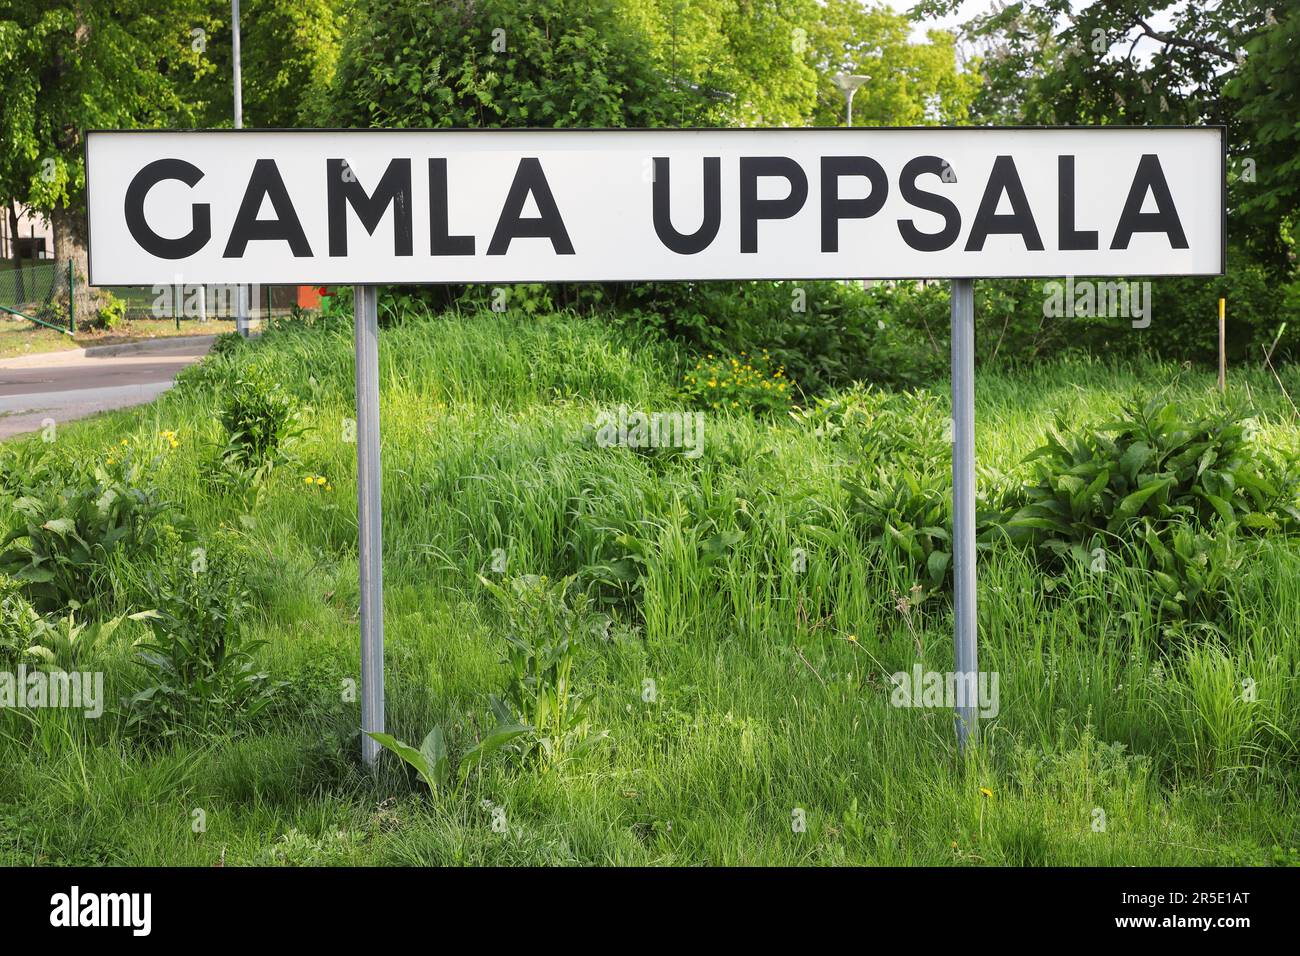 The Old Uppsala district name sign in the Swedish town of Uppsala. Stock Photo